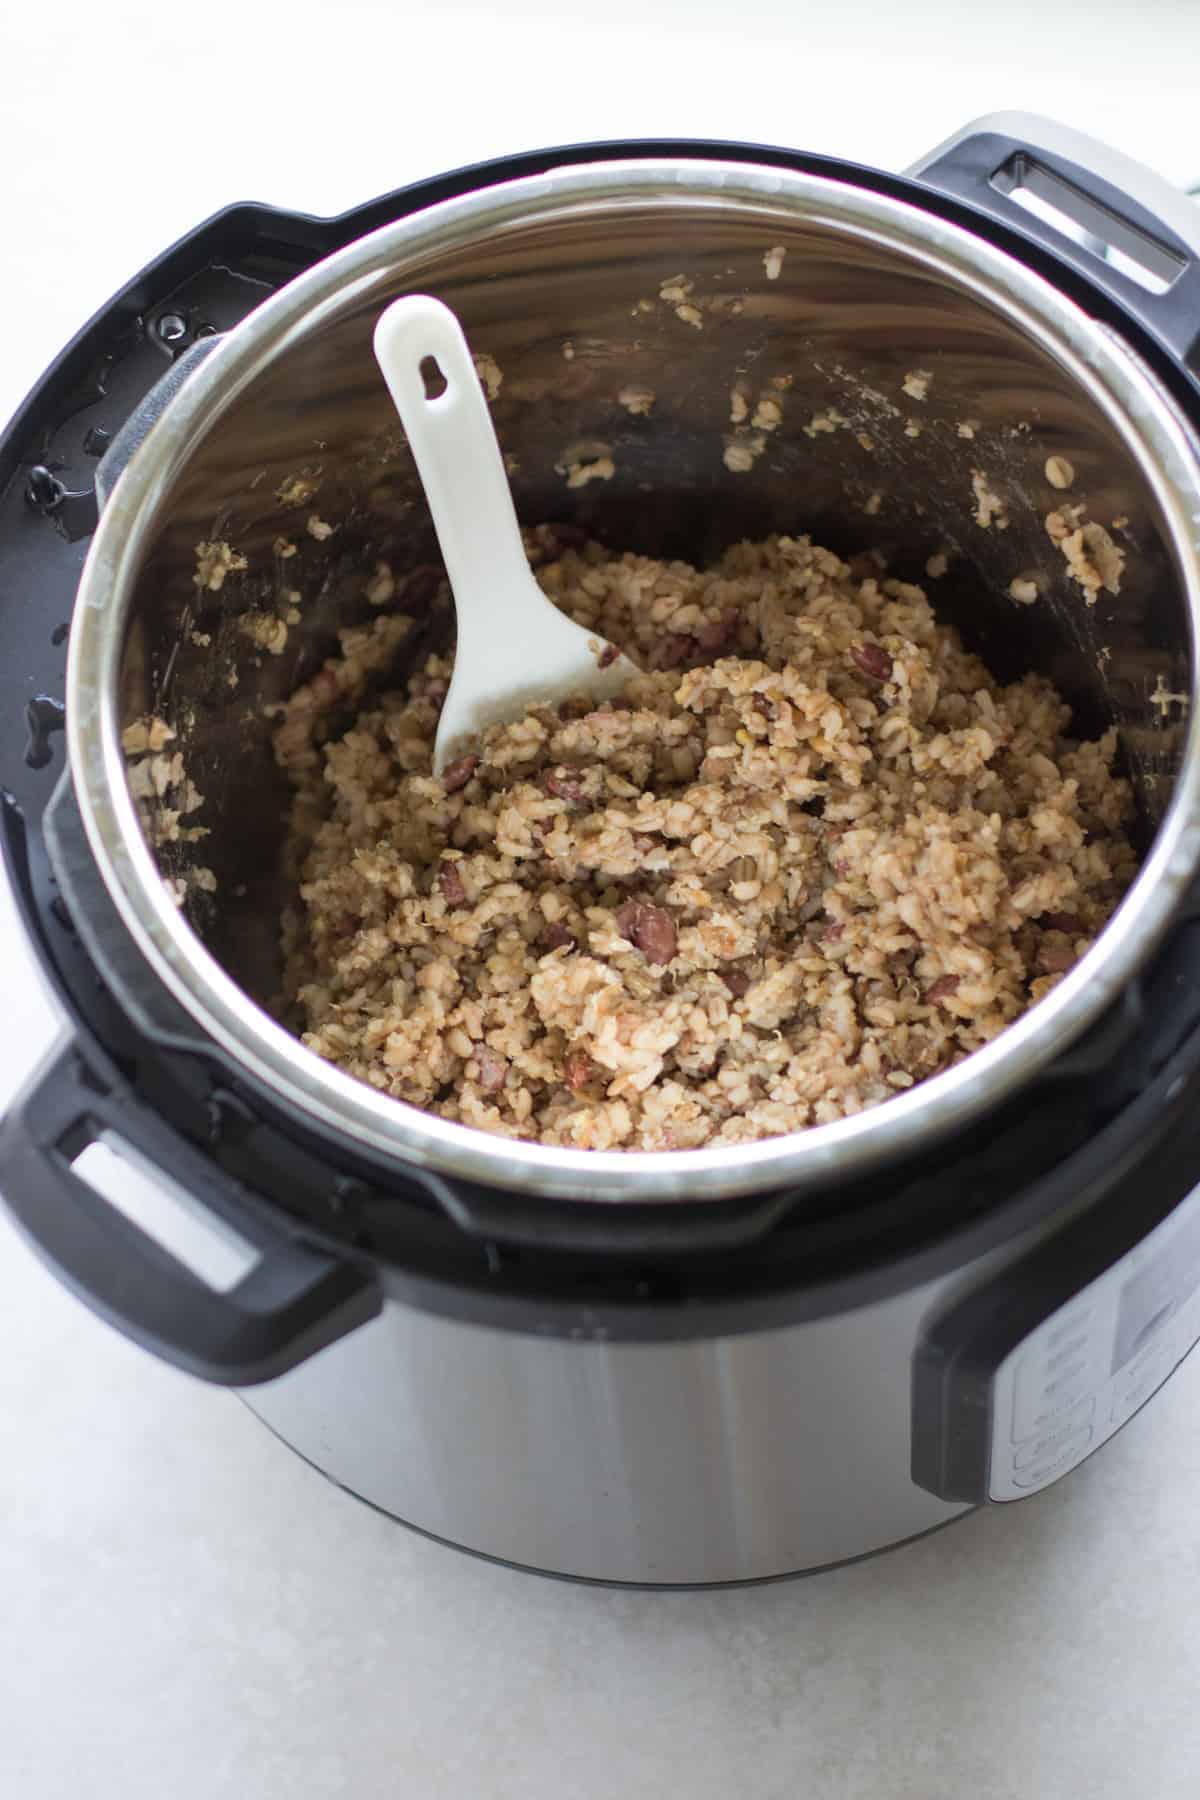 cooked multigrain rice inside the Instant pot with a spatula